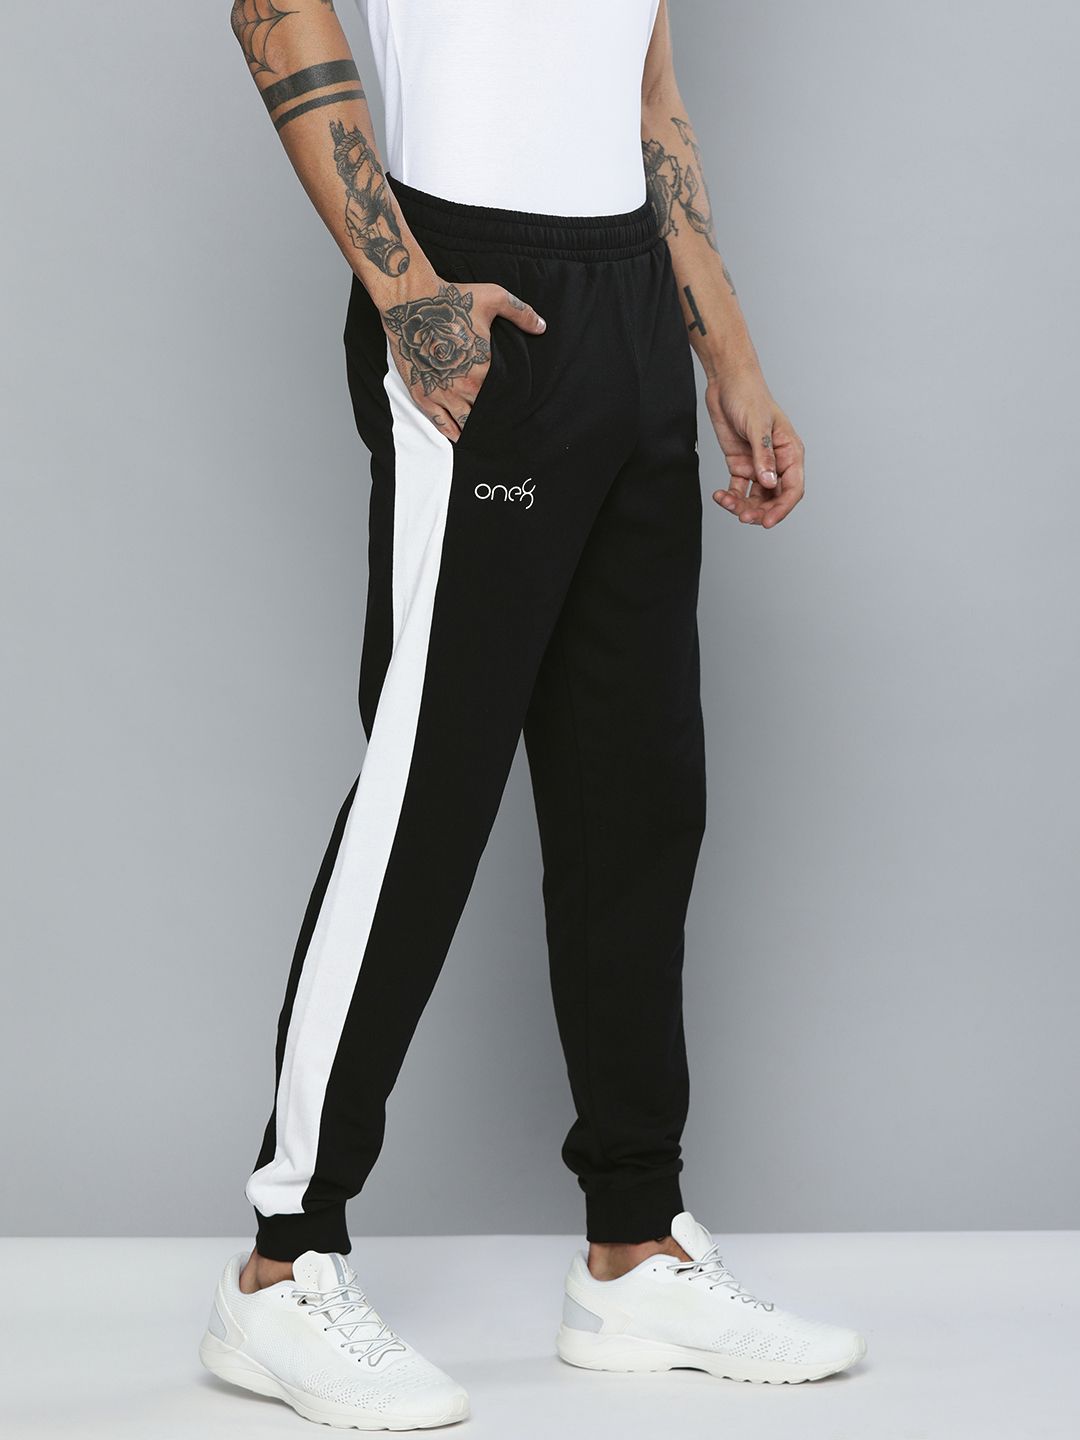 Cotton/Linen Printed Puma One8 Fit Joggers